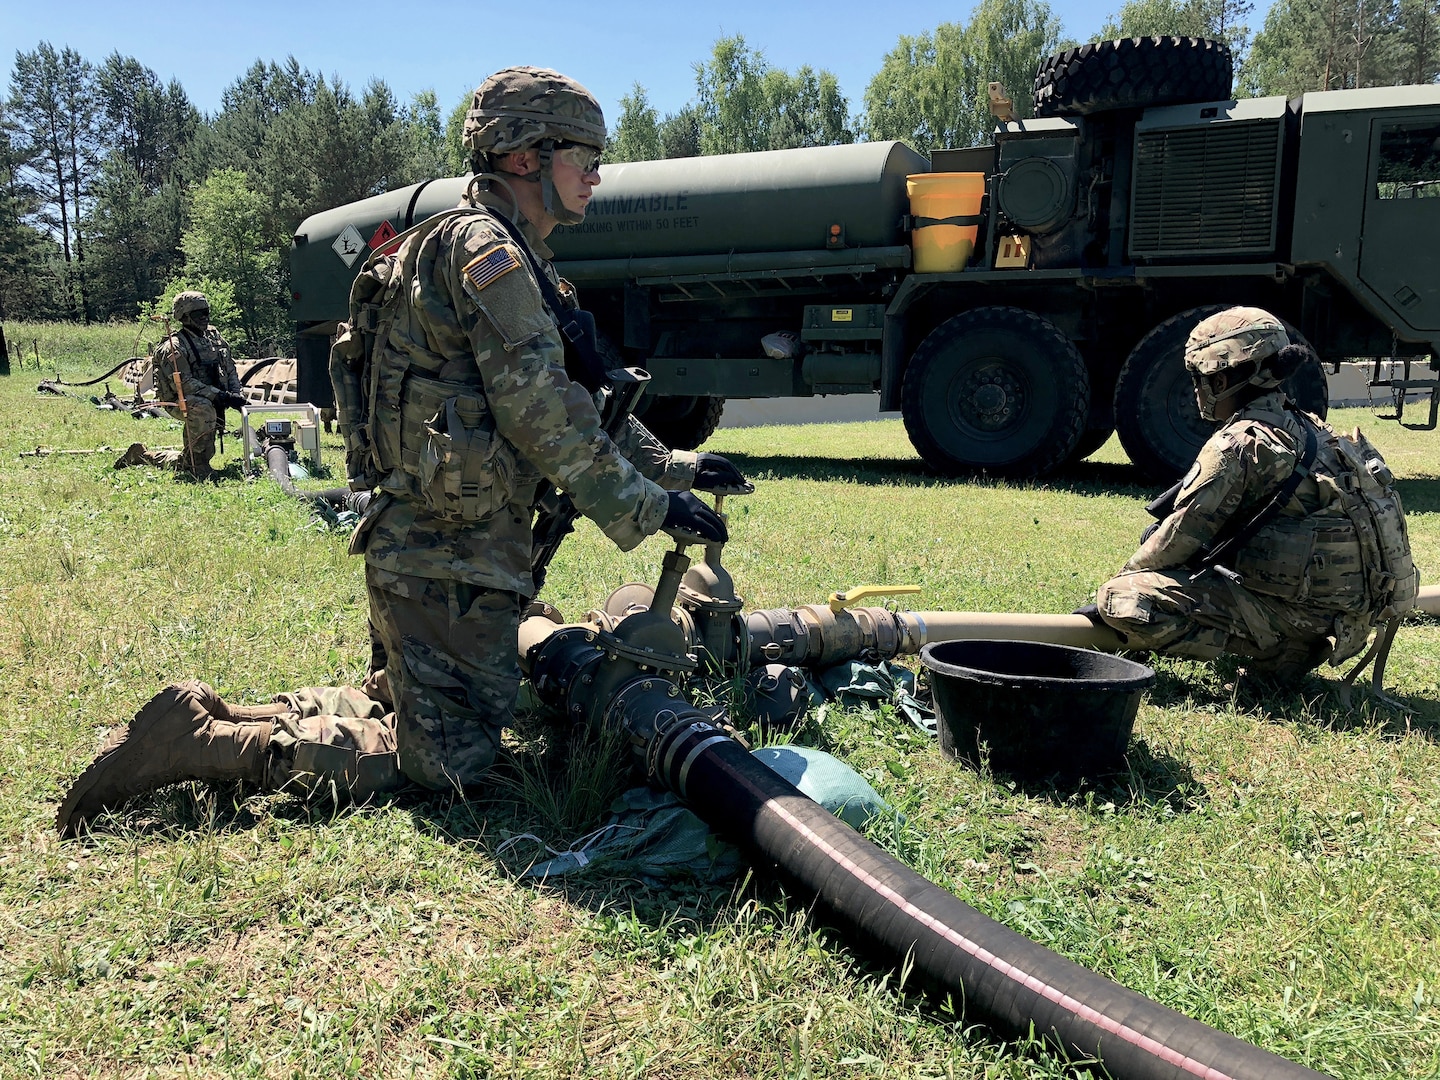 Soldiers with the 240th Composite Supply Company monitor a fuel pump pushing DLA-managed gas in Drawsko Pomorskie, Poland, during Saber Strike 2018. DLA supported the U.S. Army Europe-led exercise in Estonia, Latvia, Lithuania and Poland.